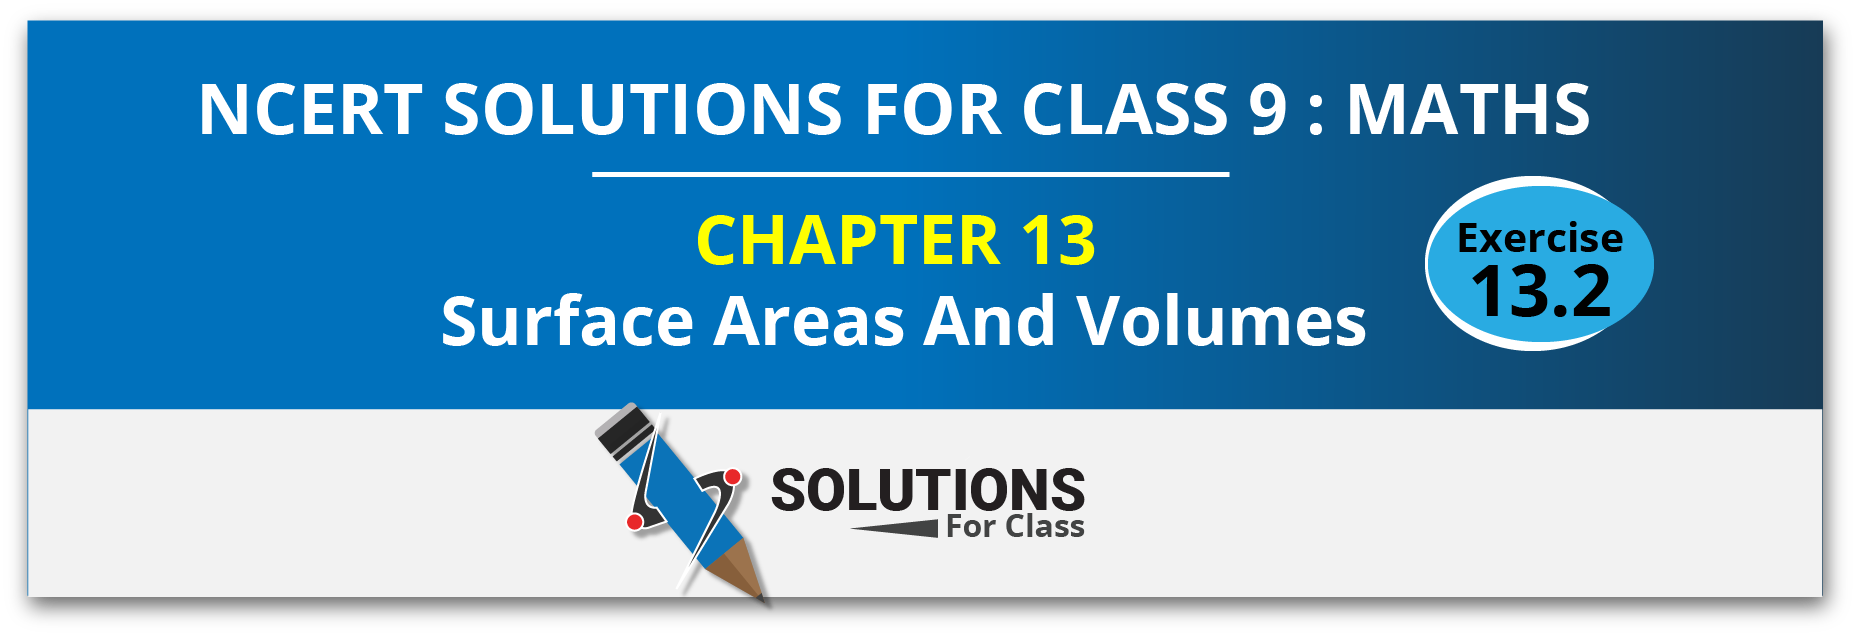 NCERT Solutions for Class 9 Maths Chapter 13 Surface Areas and Volumes Ex 13.2